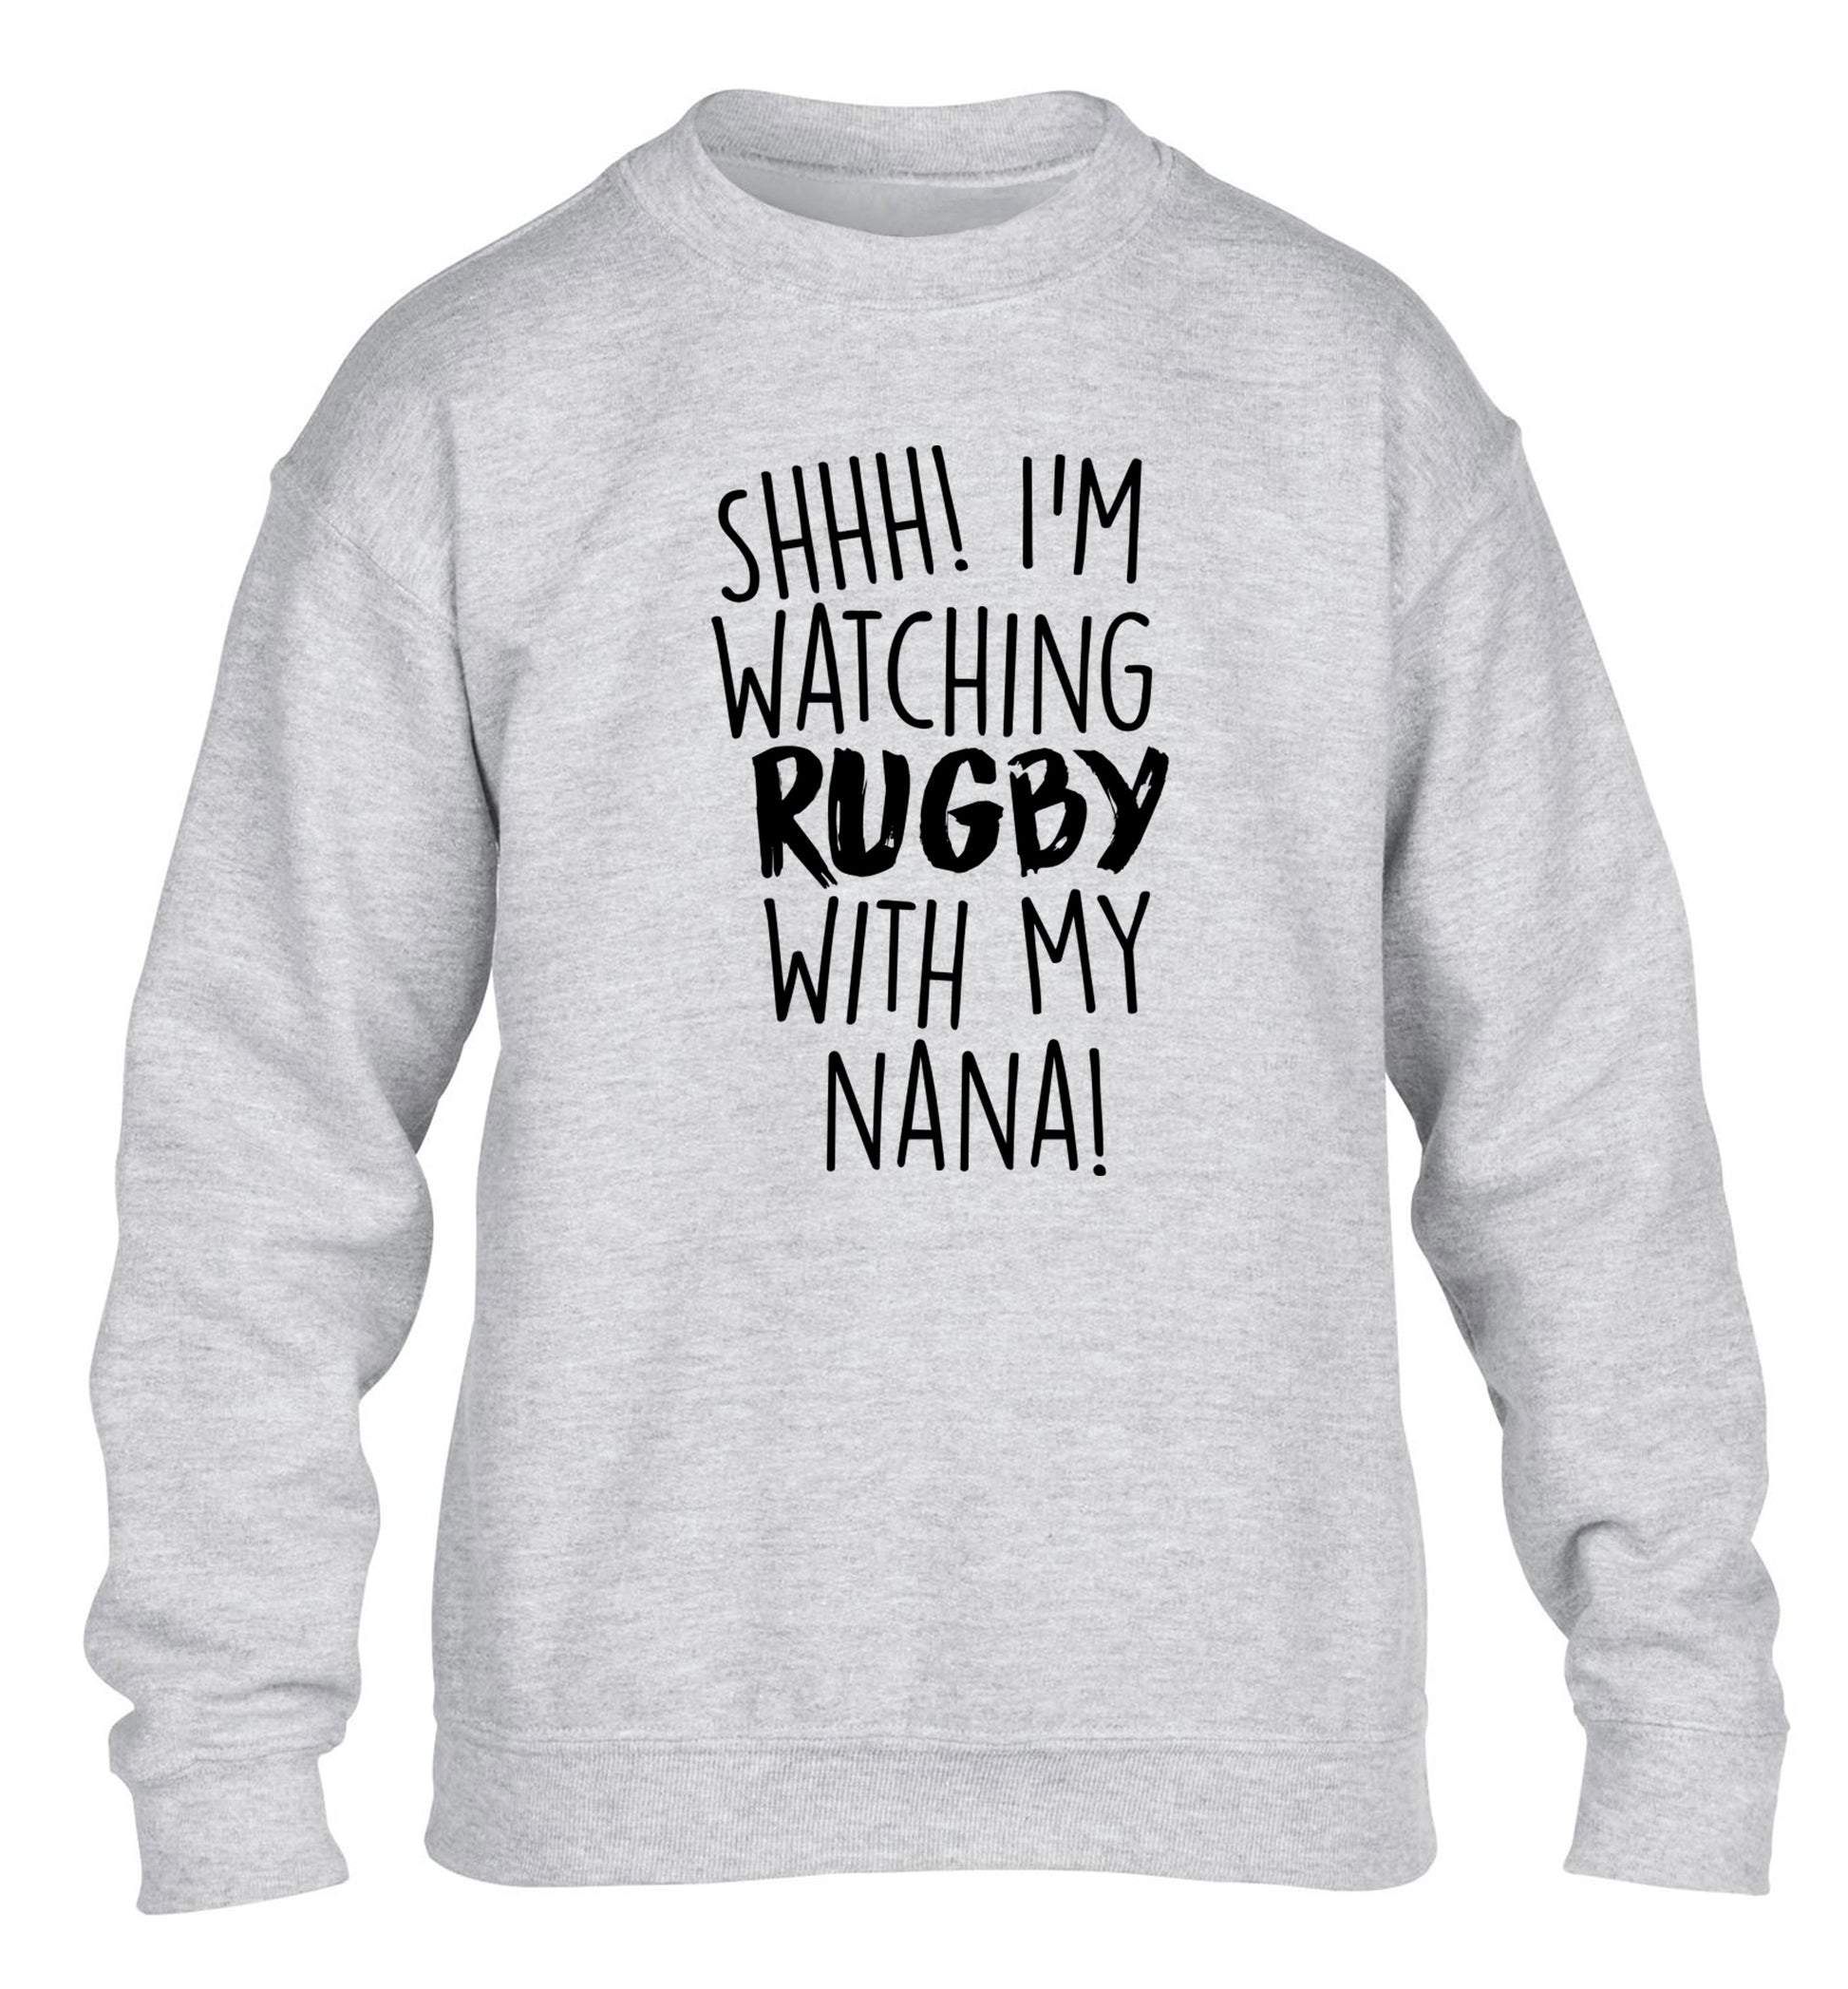 Shh I'm watching rugby with my nana children's grey sweater 12-13 Years